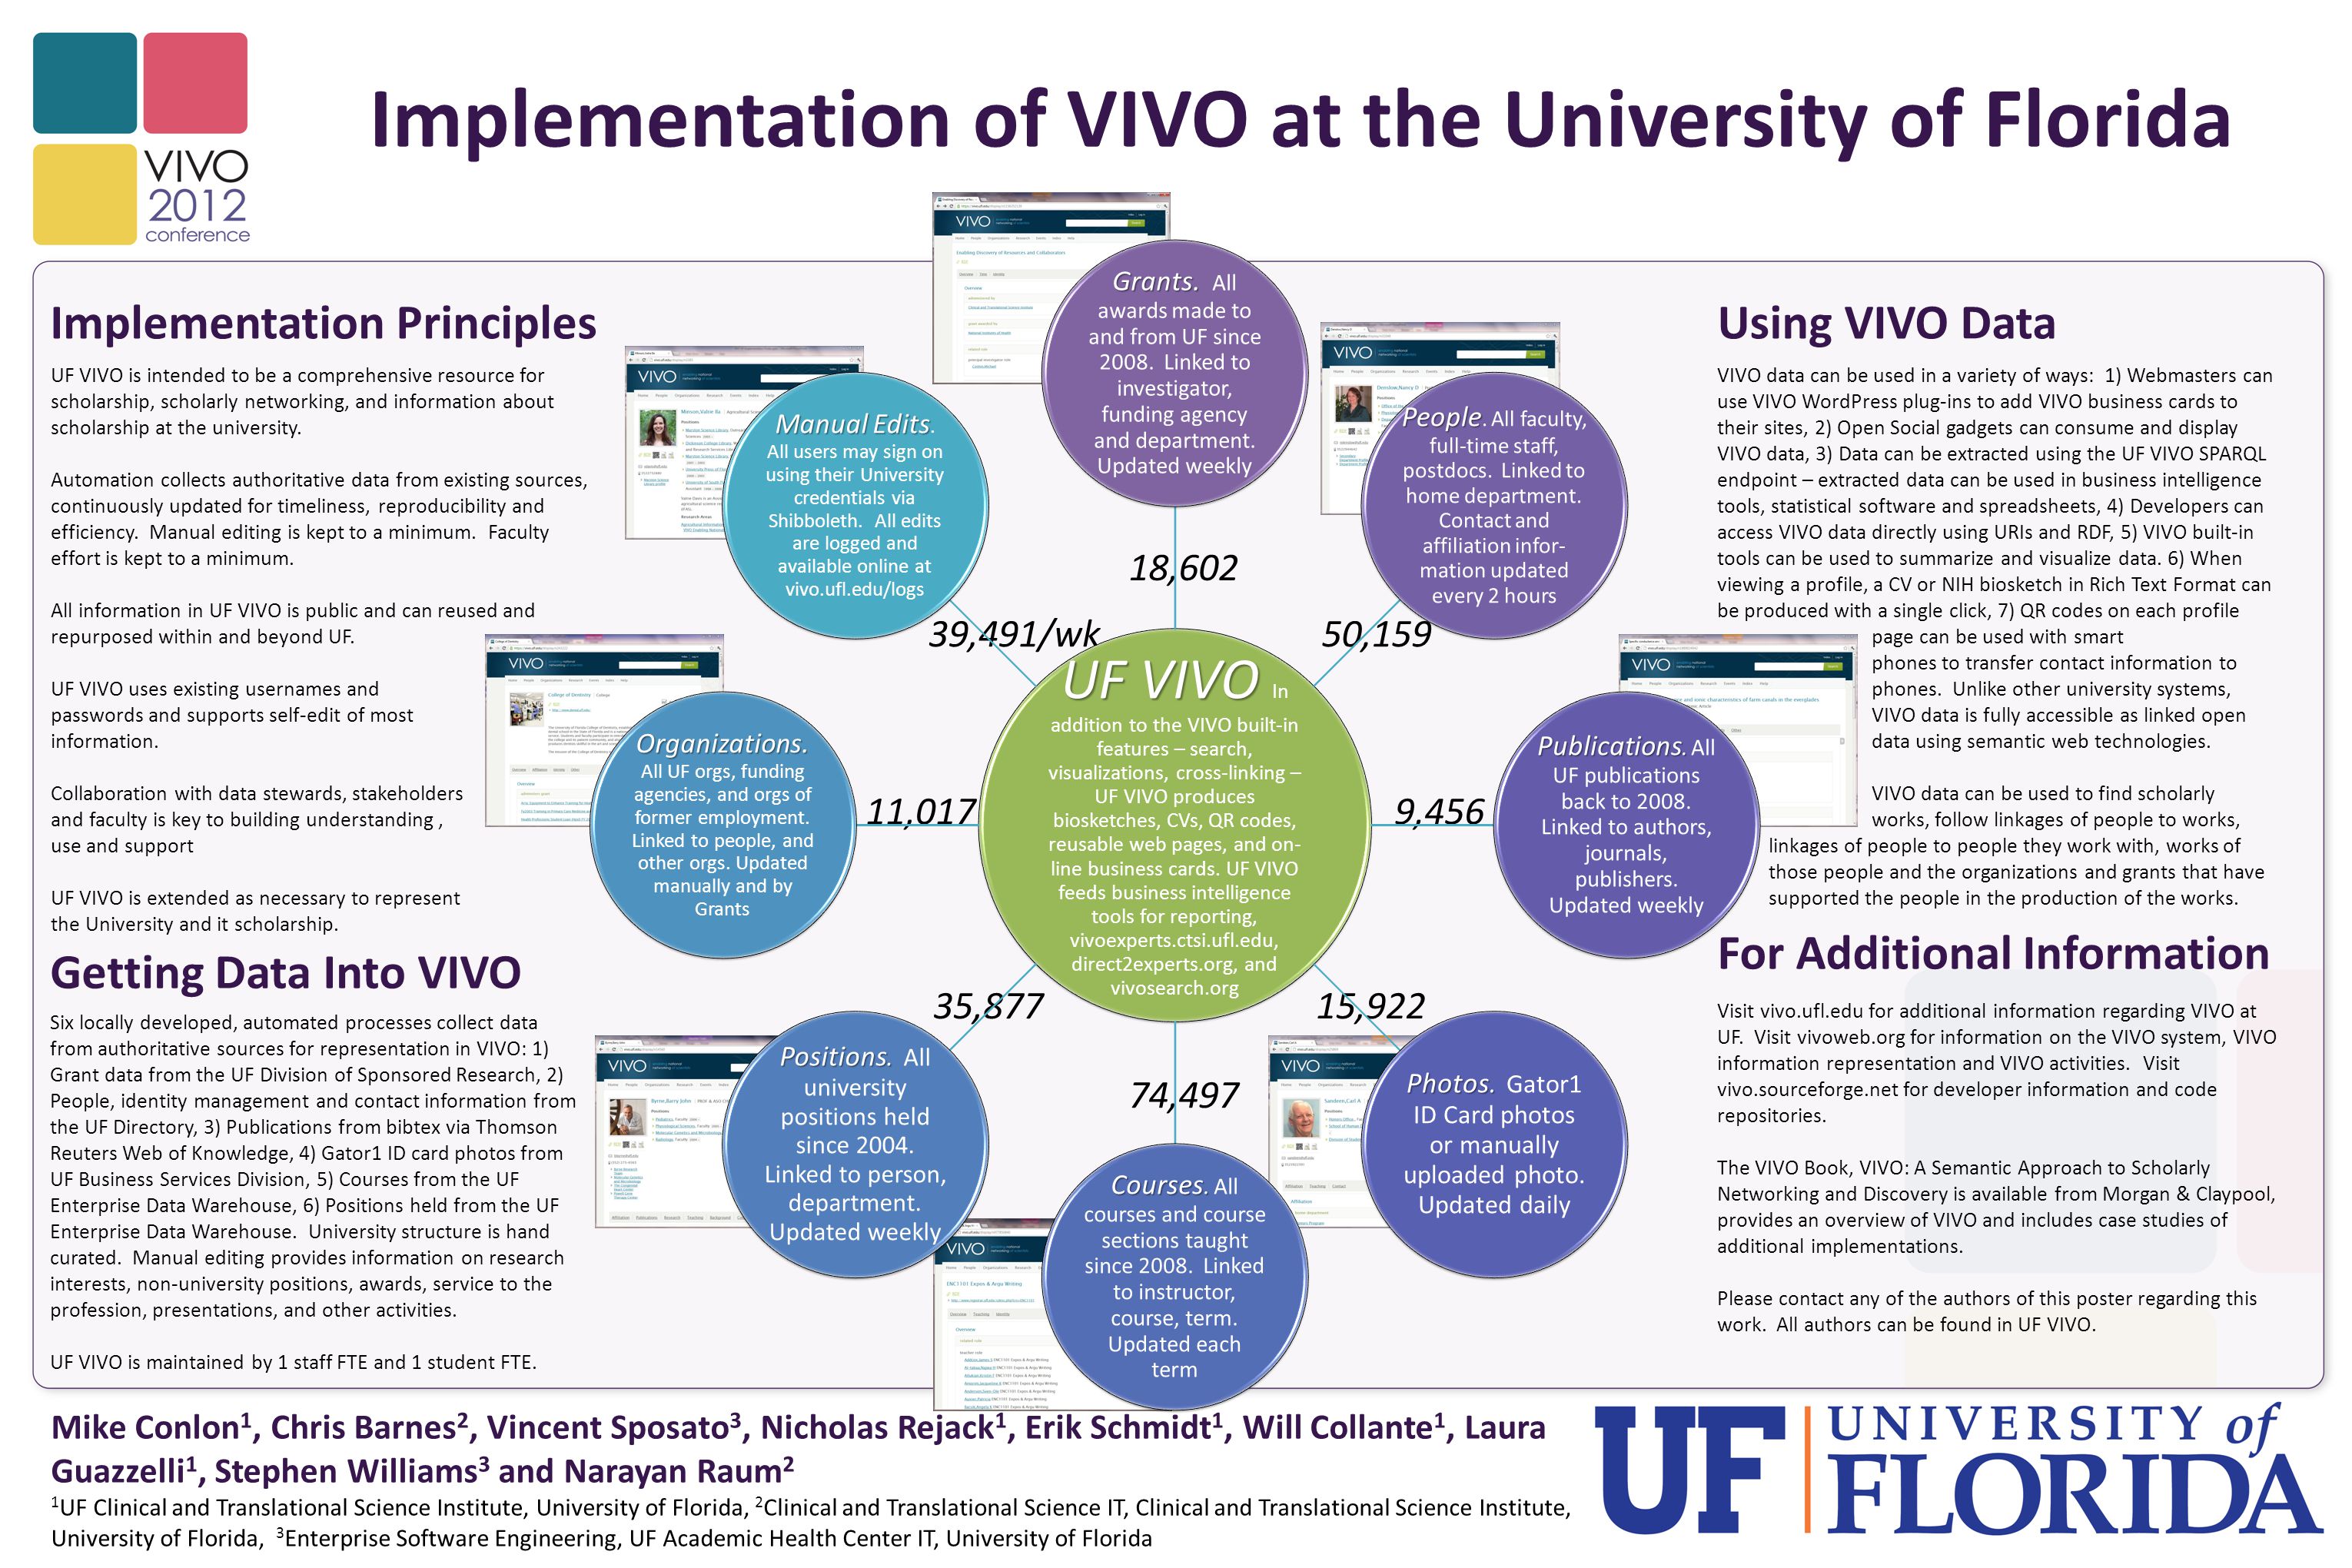 UF VIVO is intended to be a comprehensive resource for scholarship, scholarly networking, and information about scholarship at the university.